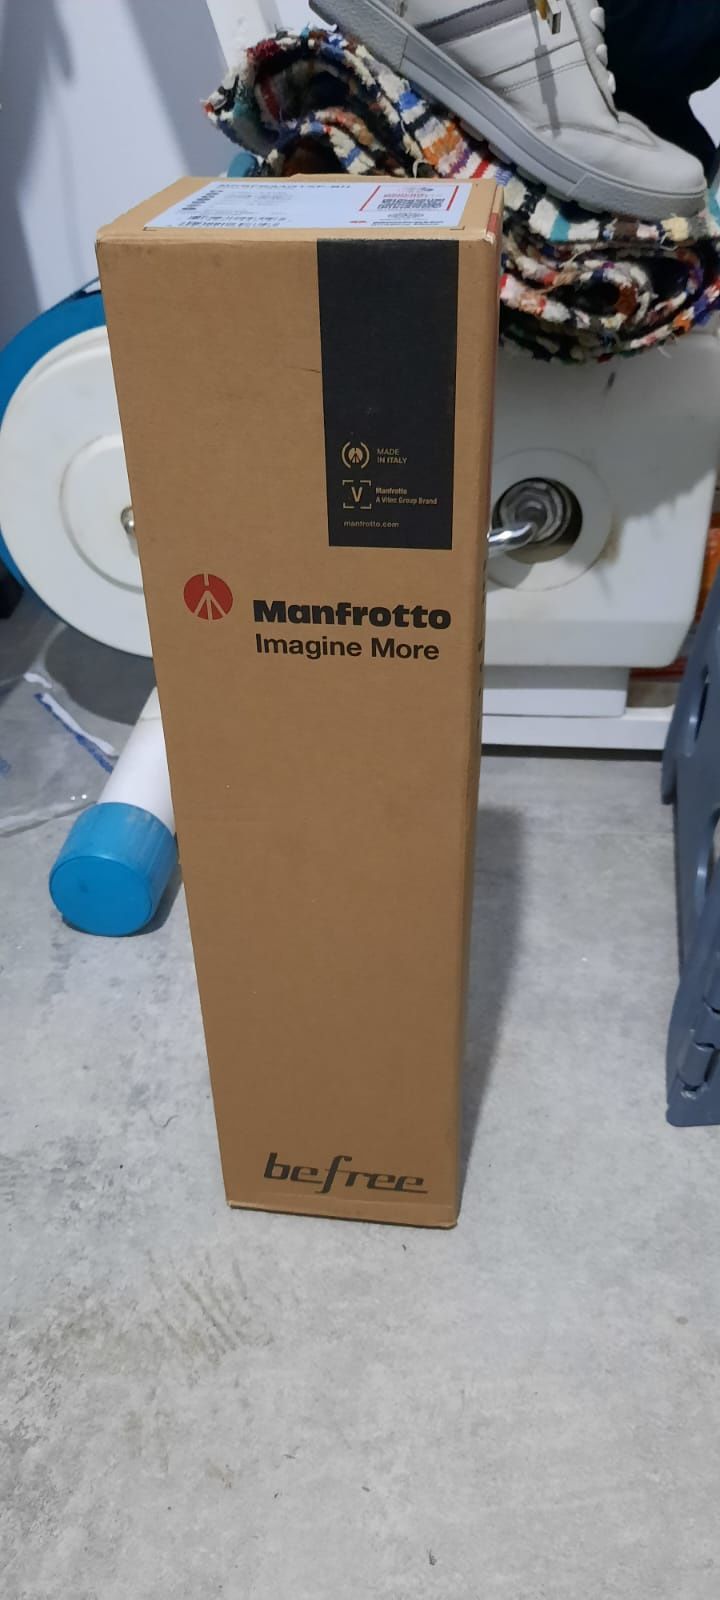 Trepied  Manfrotto